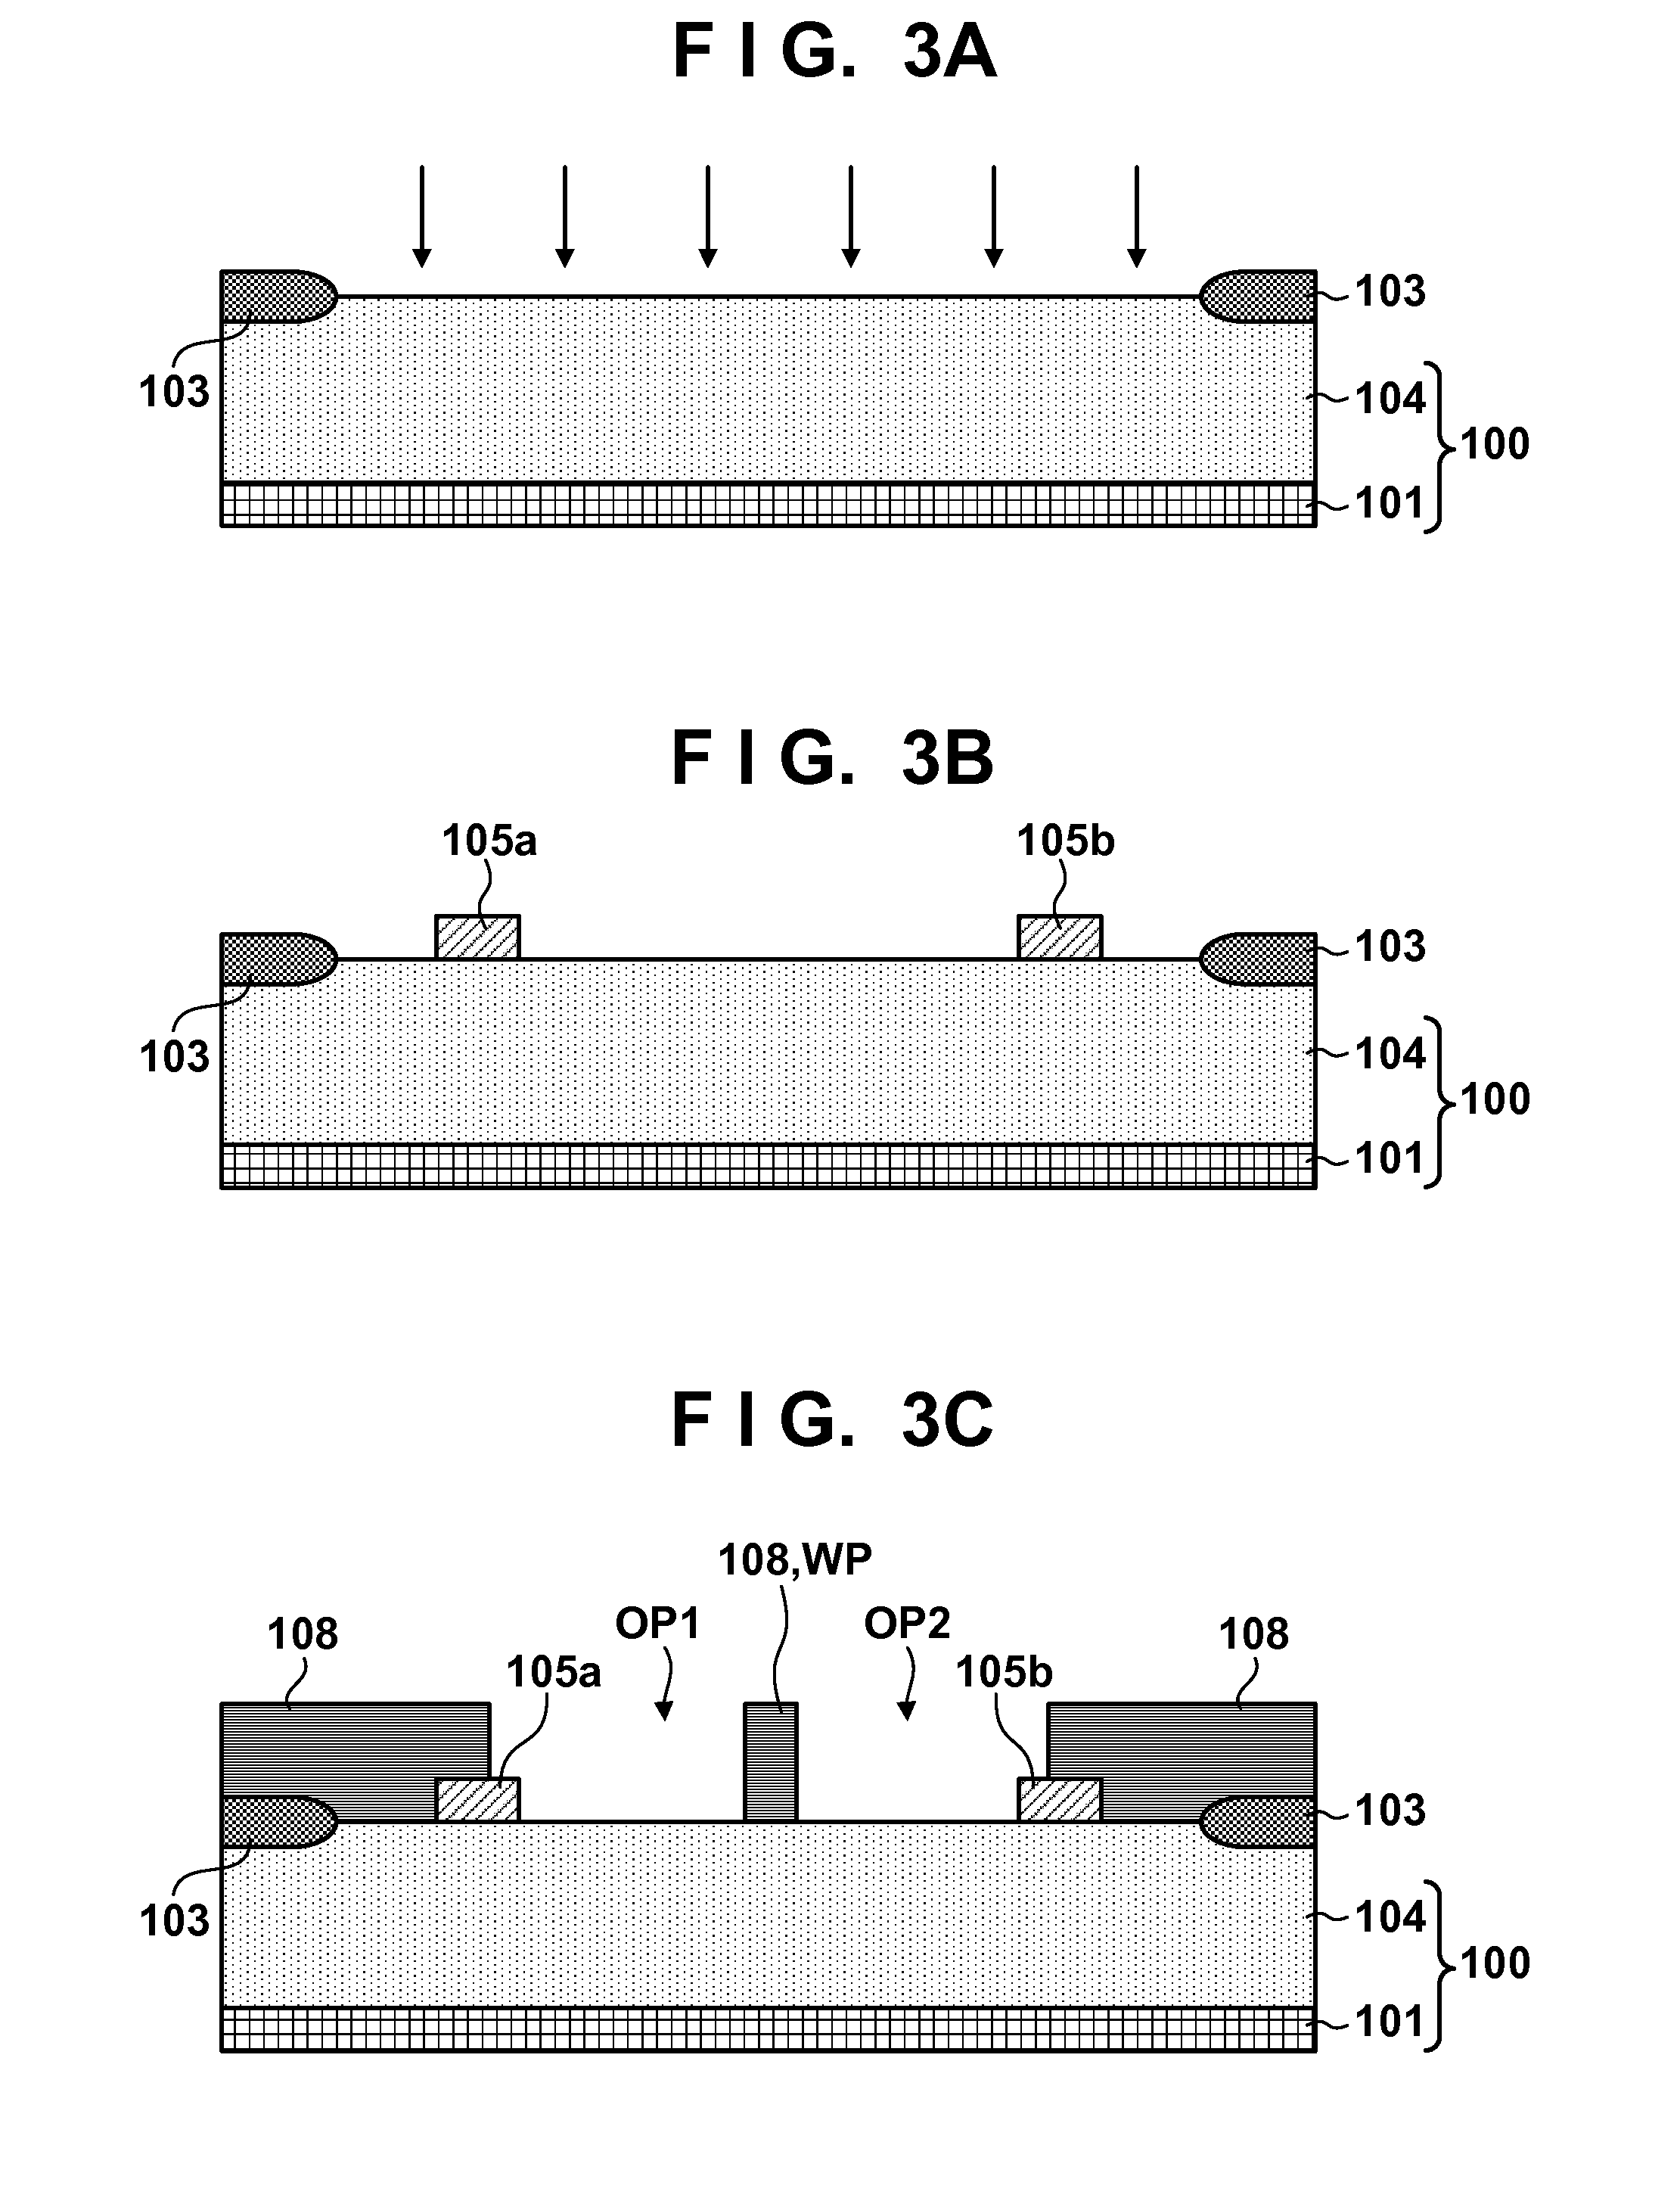 Solid-state image sensor, method of manufacturing the same, and camera